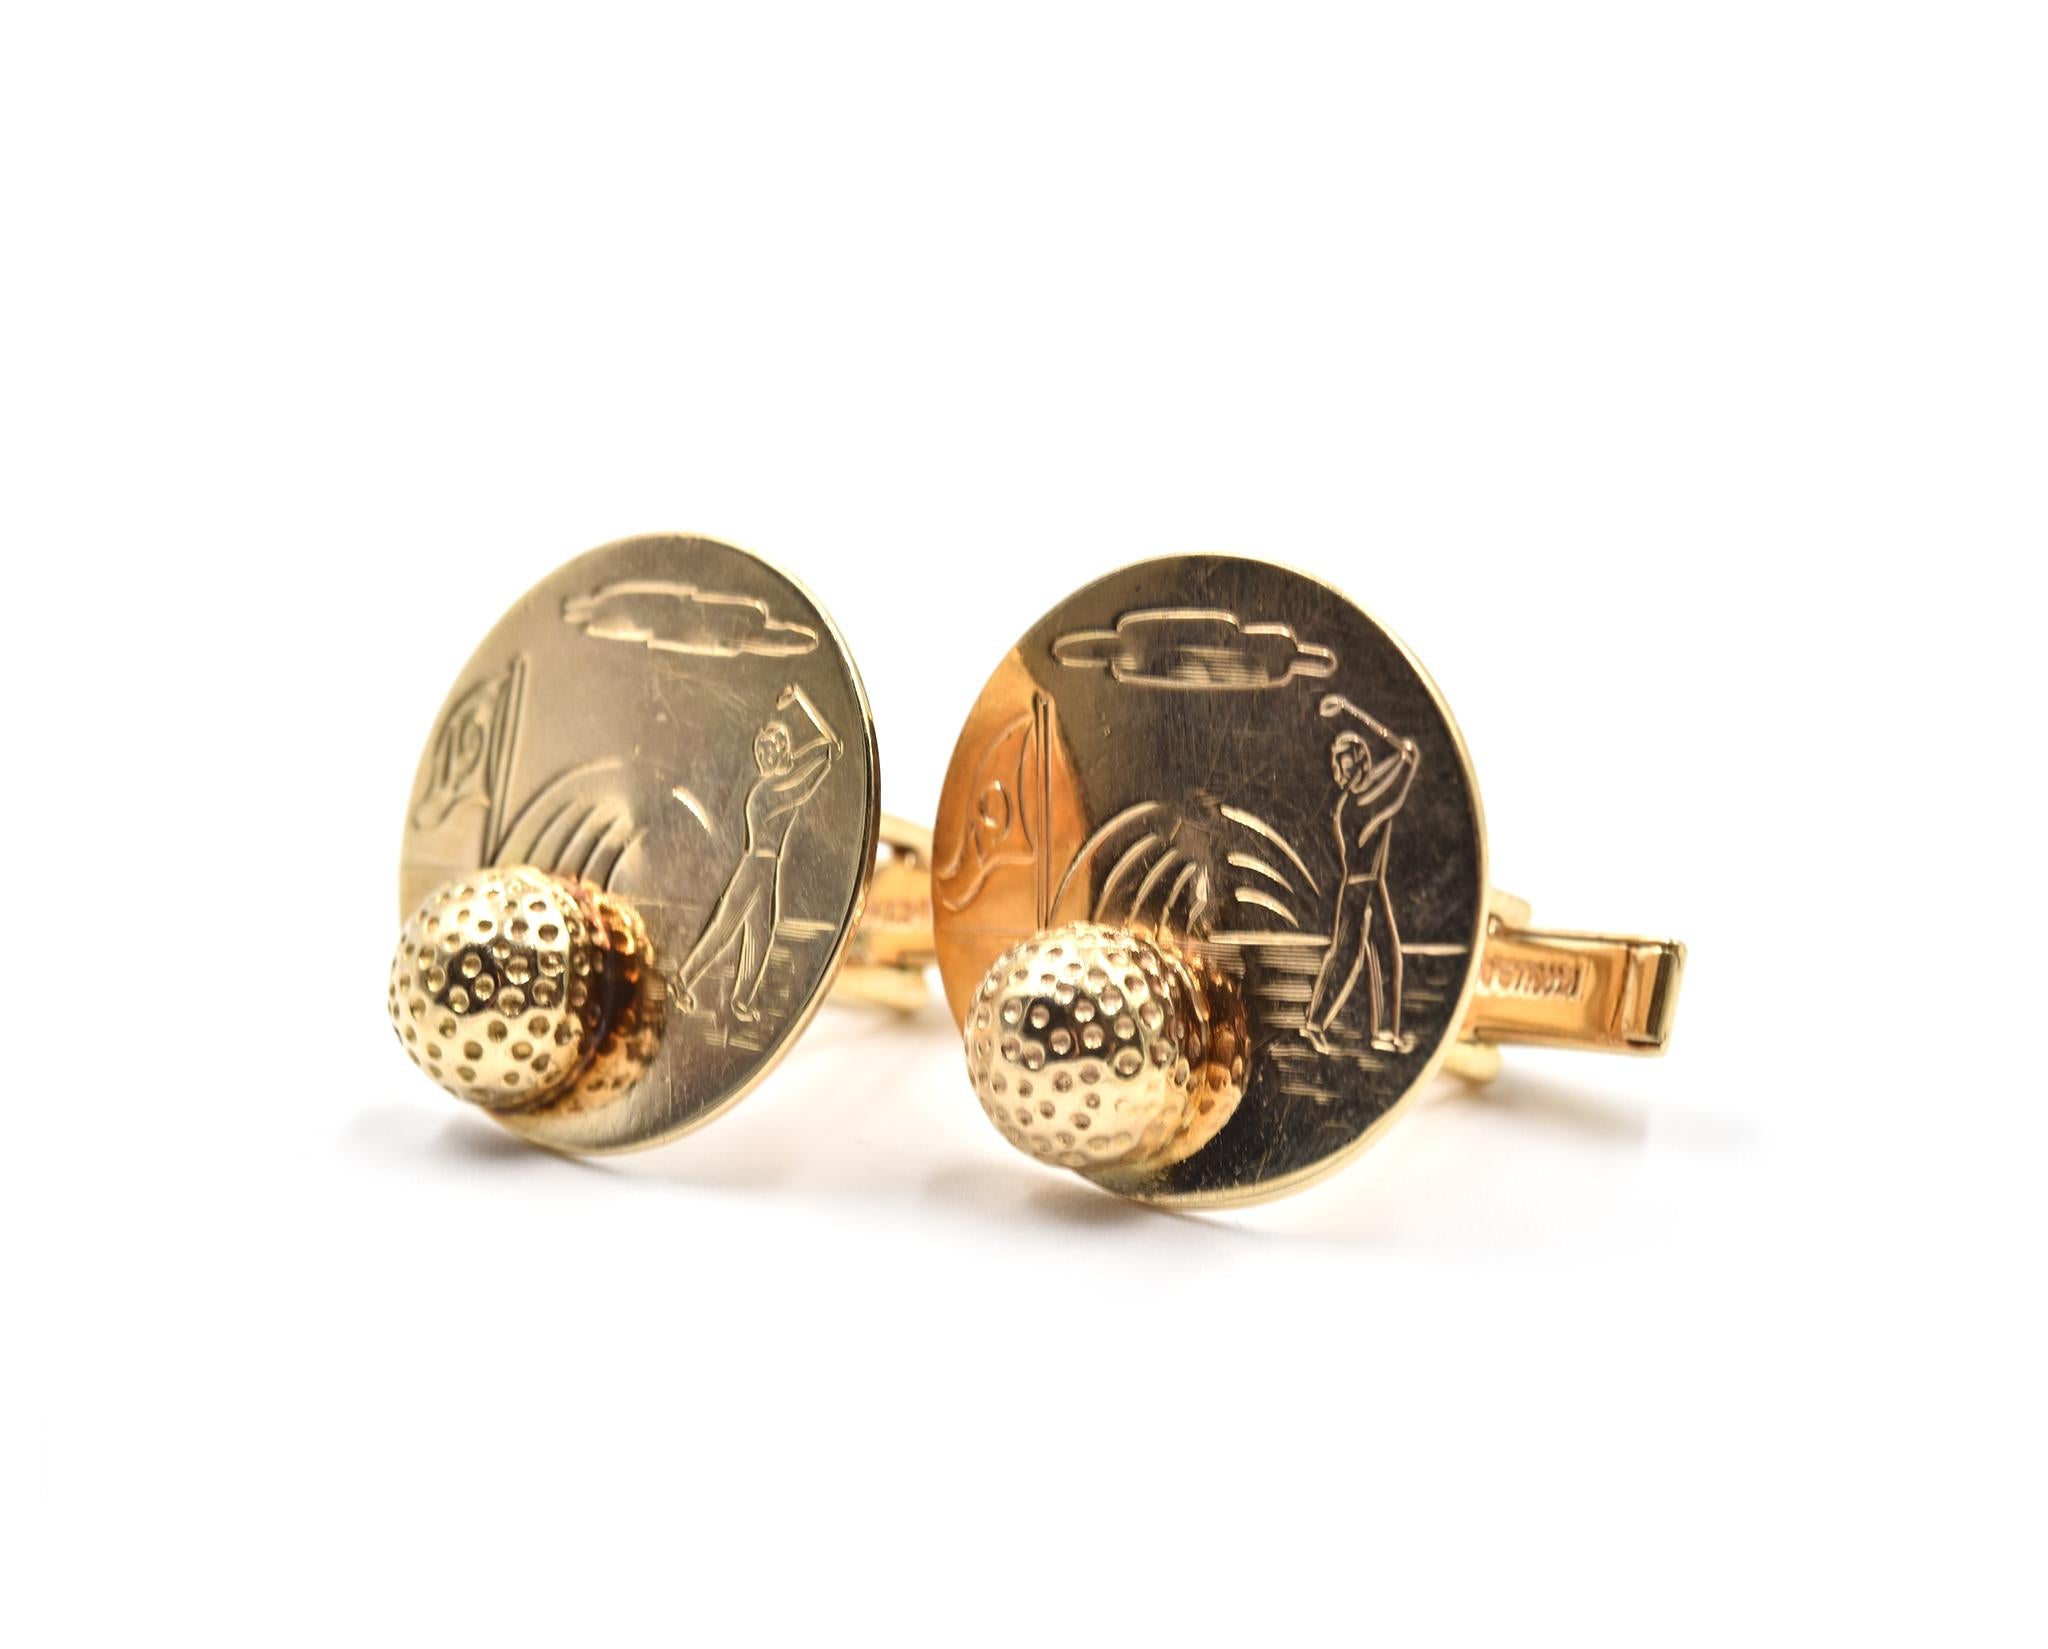 Material: 14k yellow gold
Dimensions: each cufflink measures 1 inches long and 3/4 inches wide
Weight: 14.25 grams
